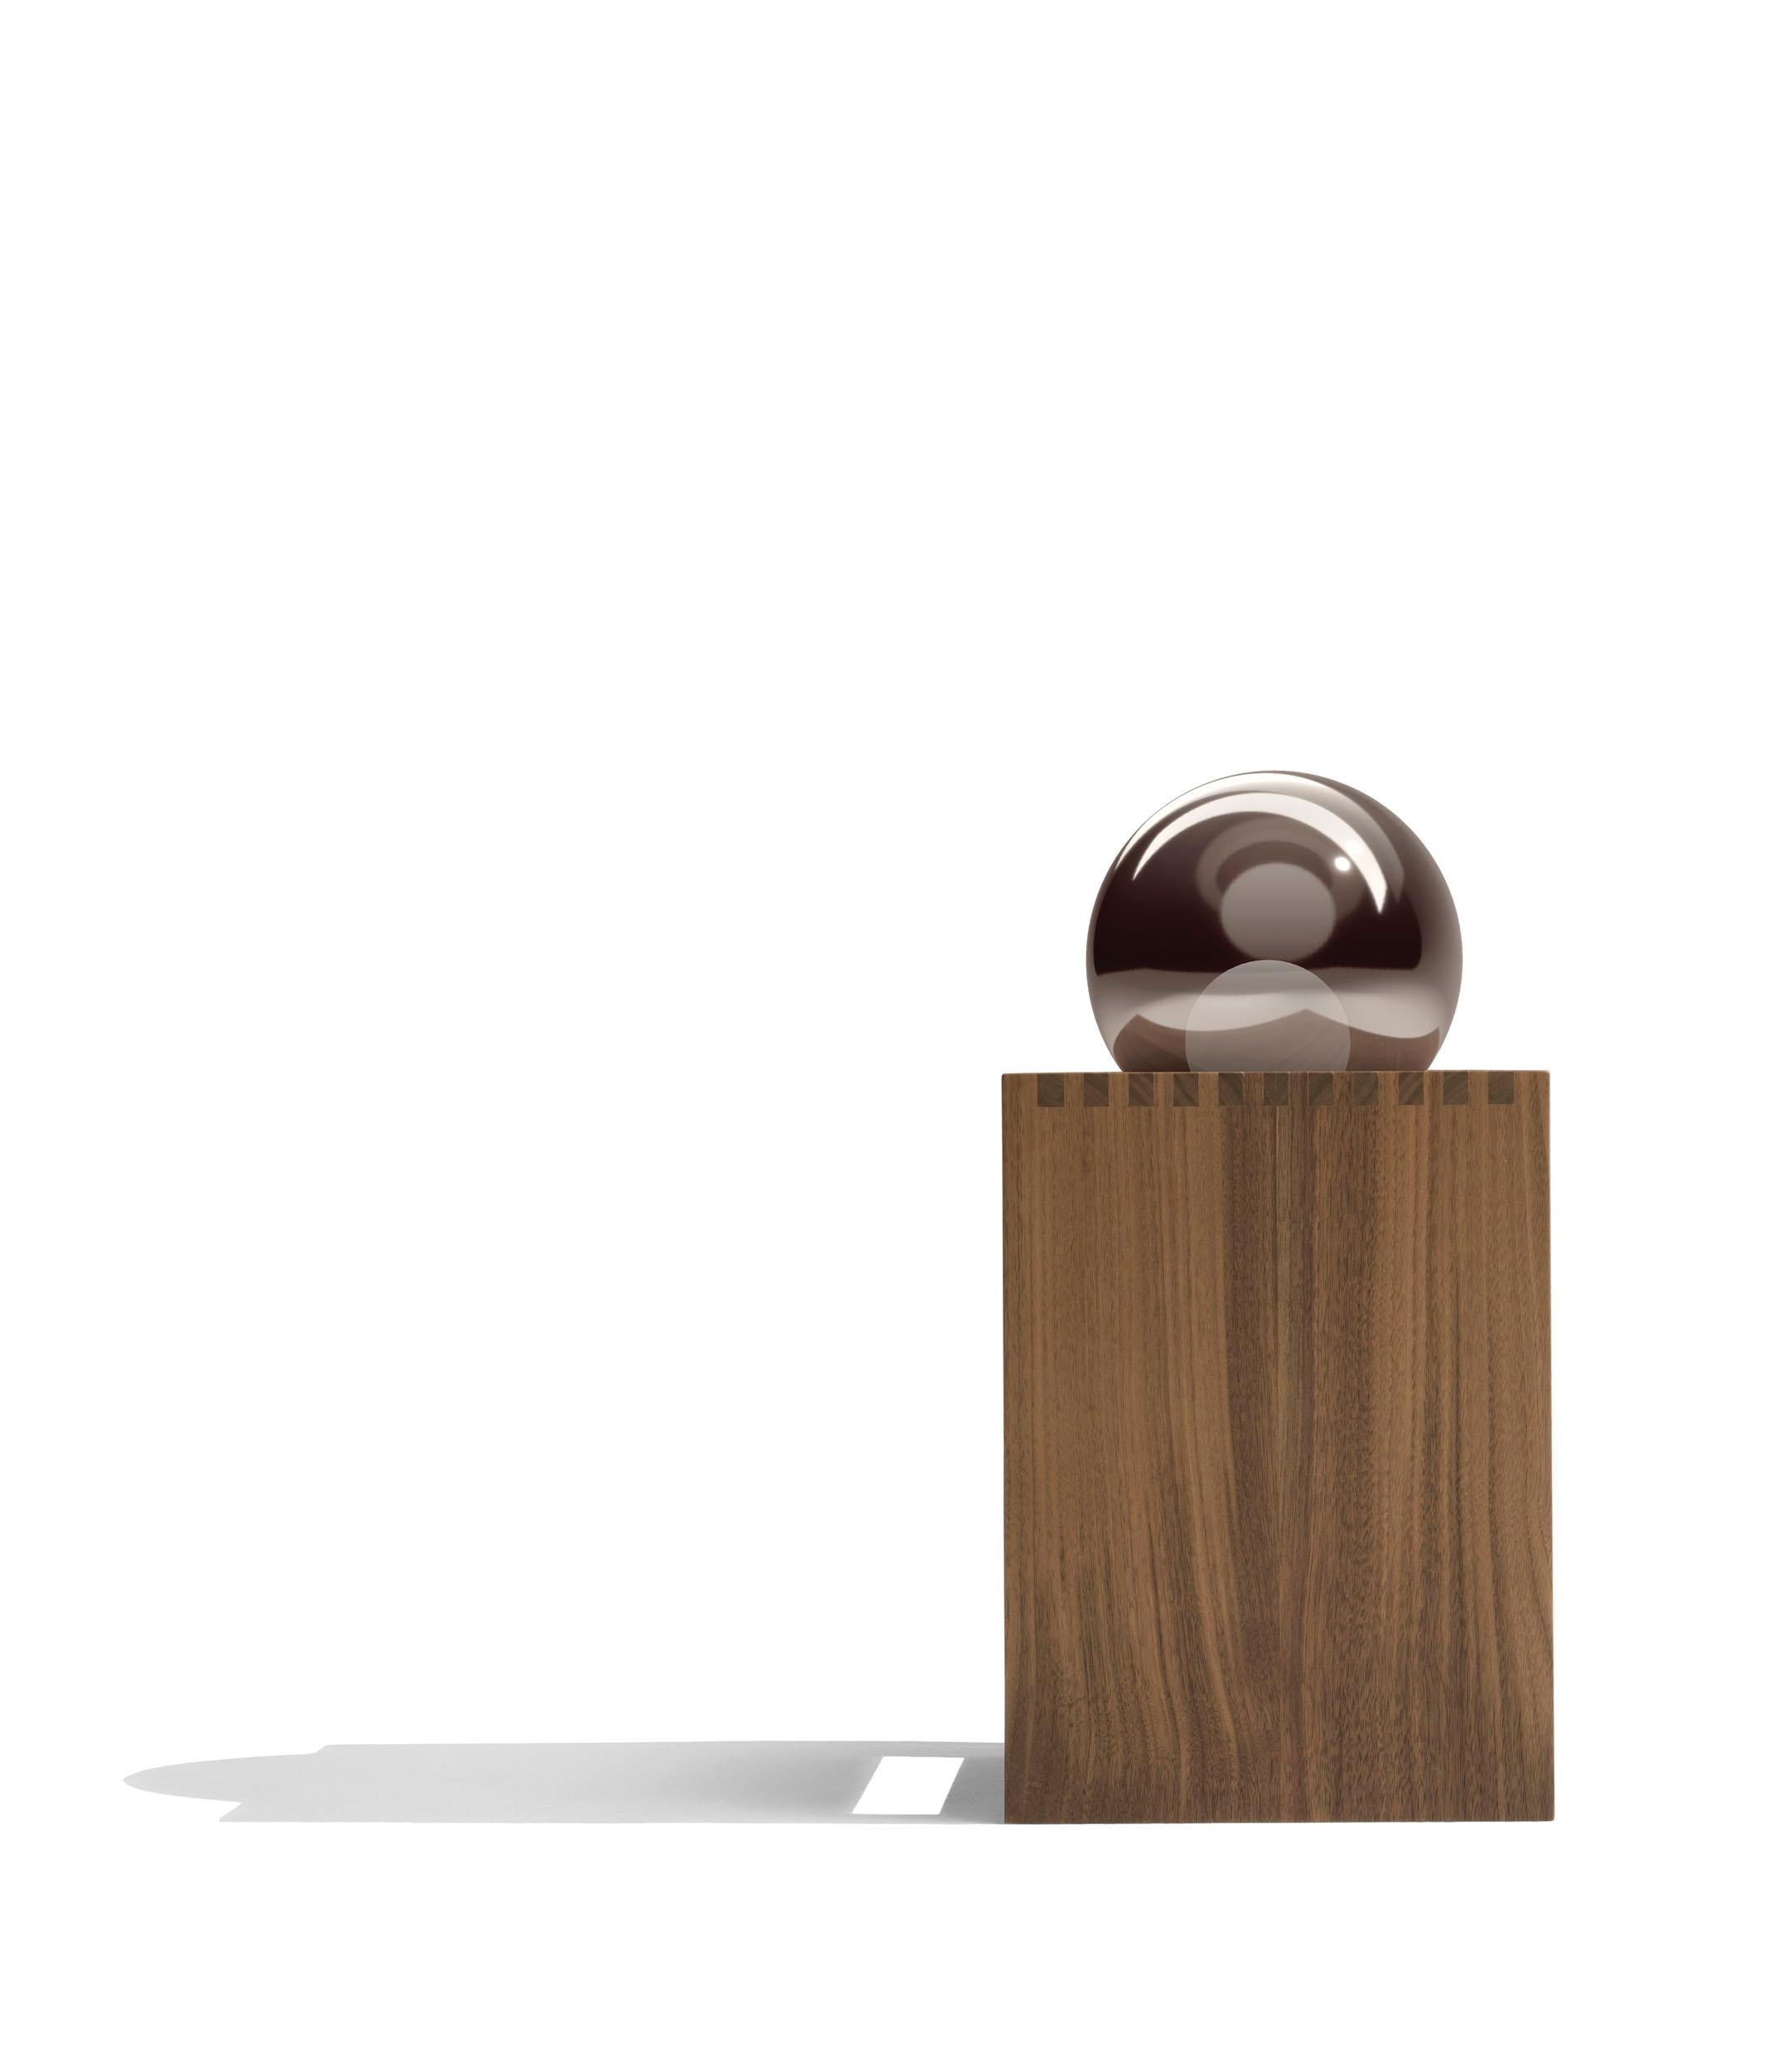 Table lamp with canaletto walnut frame fin. 11 and fin. 2W, enriched by the detail of the comb joint, Calacatta marble base and diffuser formed by a double sphere: in bronze-colored reflective glass, to enhance the glare of light, the outer one and